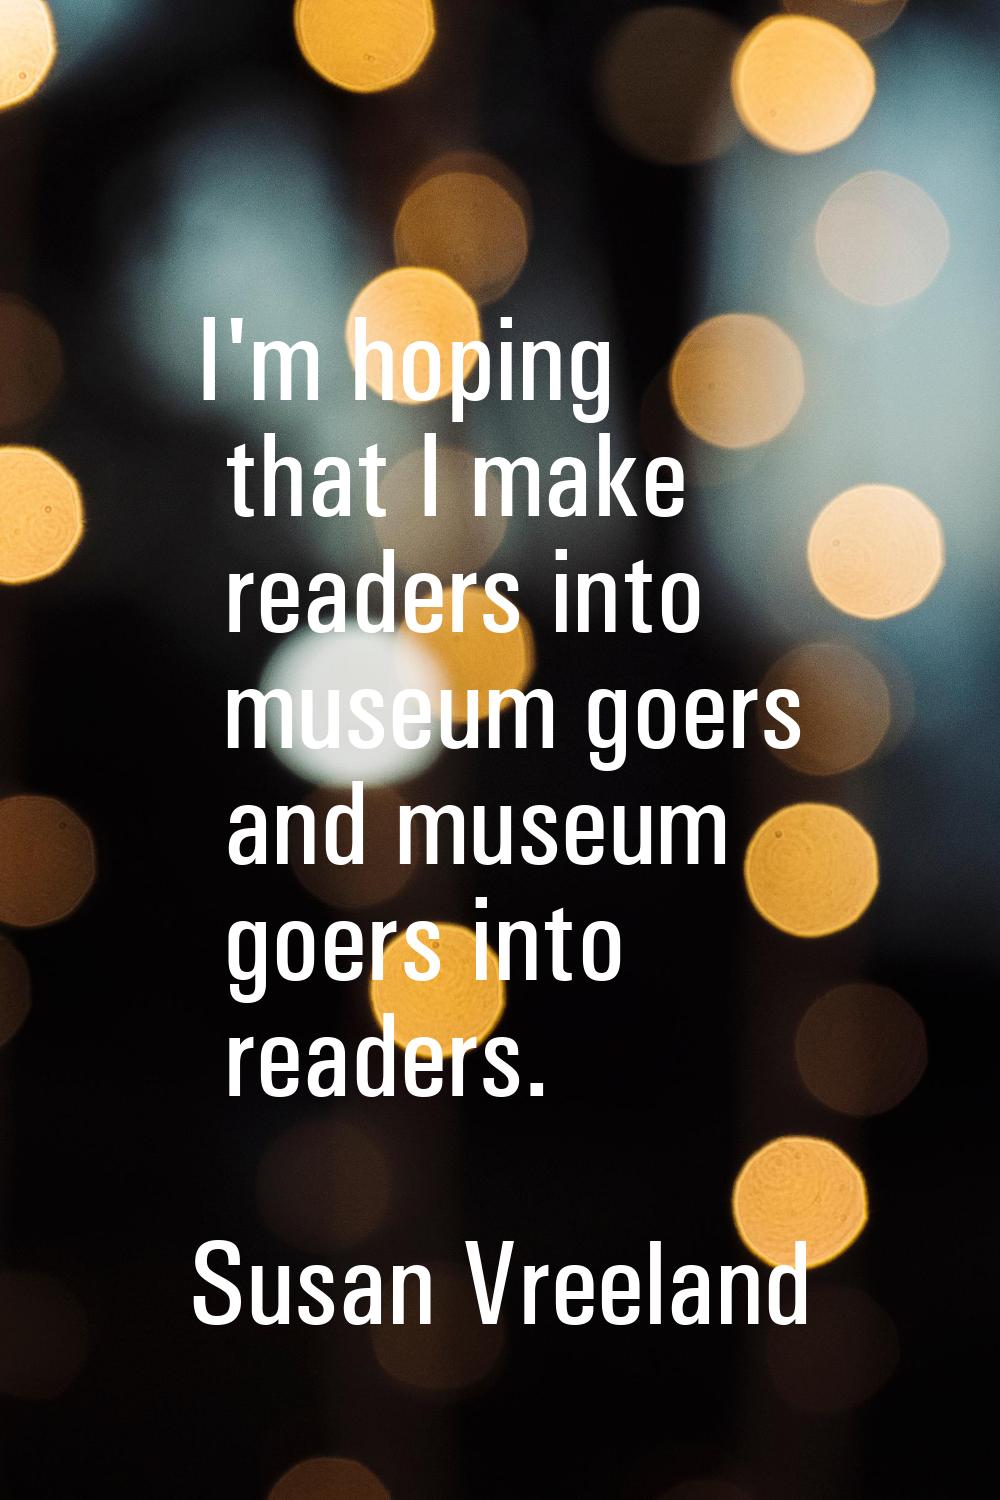 I'm hoping that I make readers into museum goers and museum goers into readers.